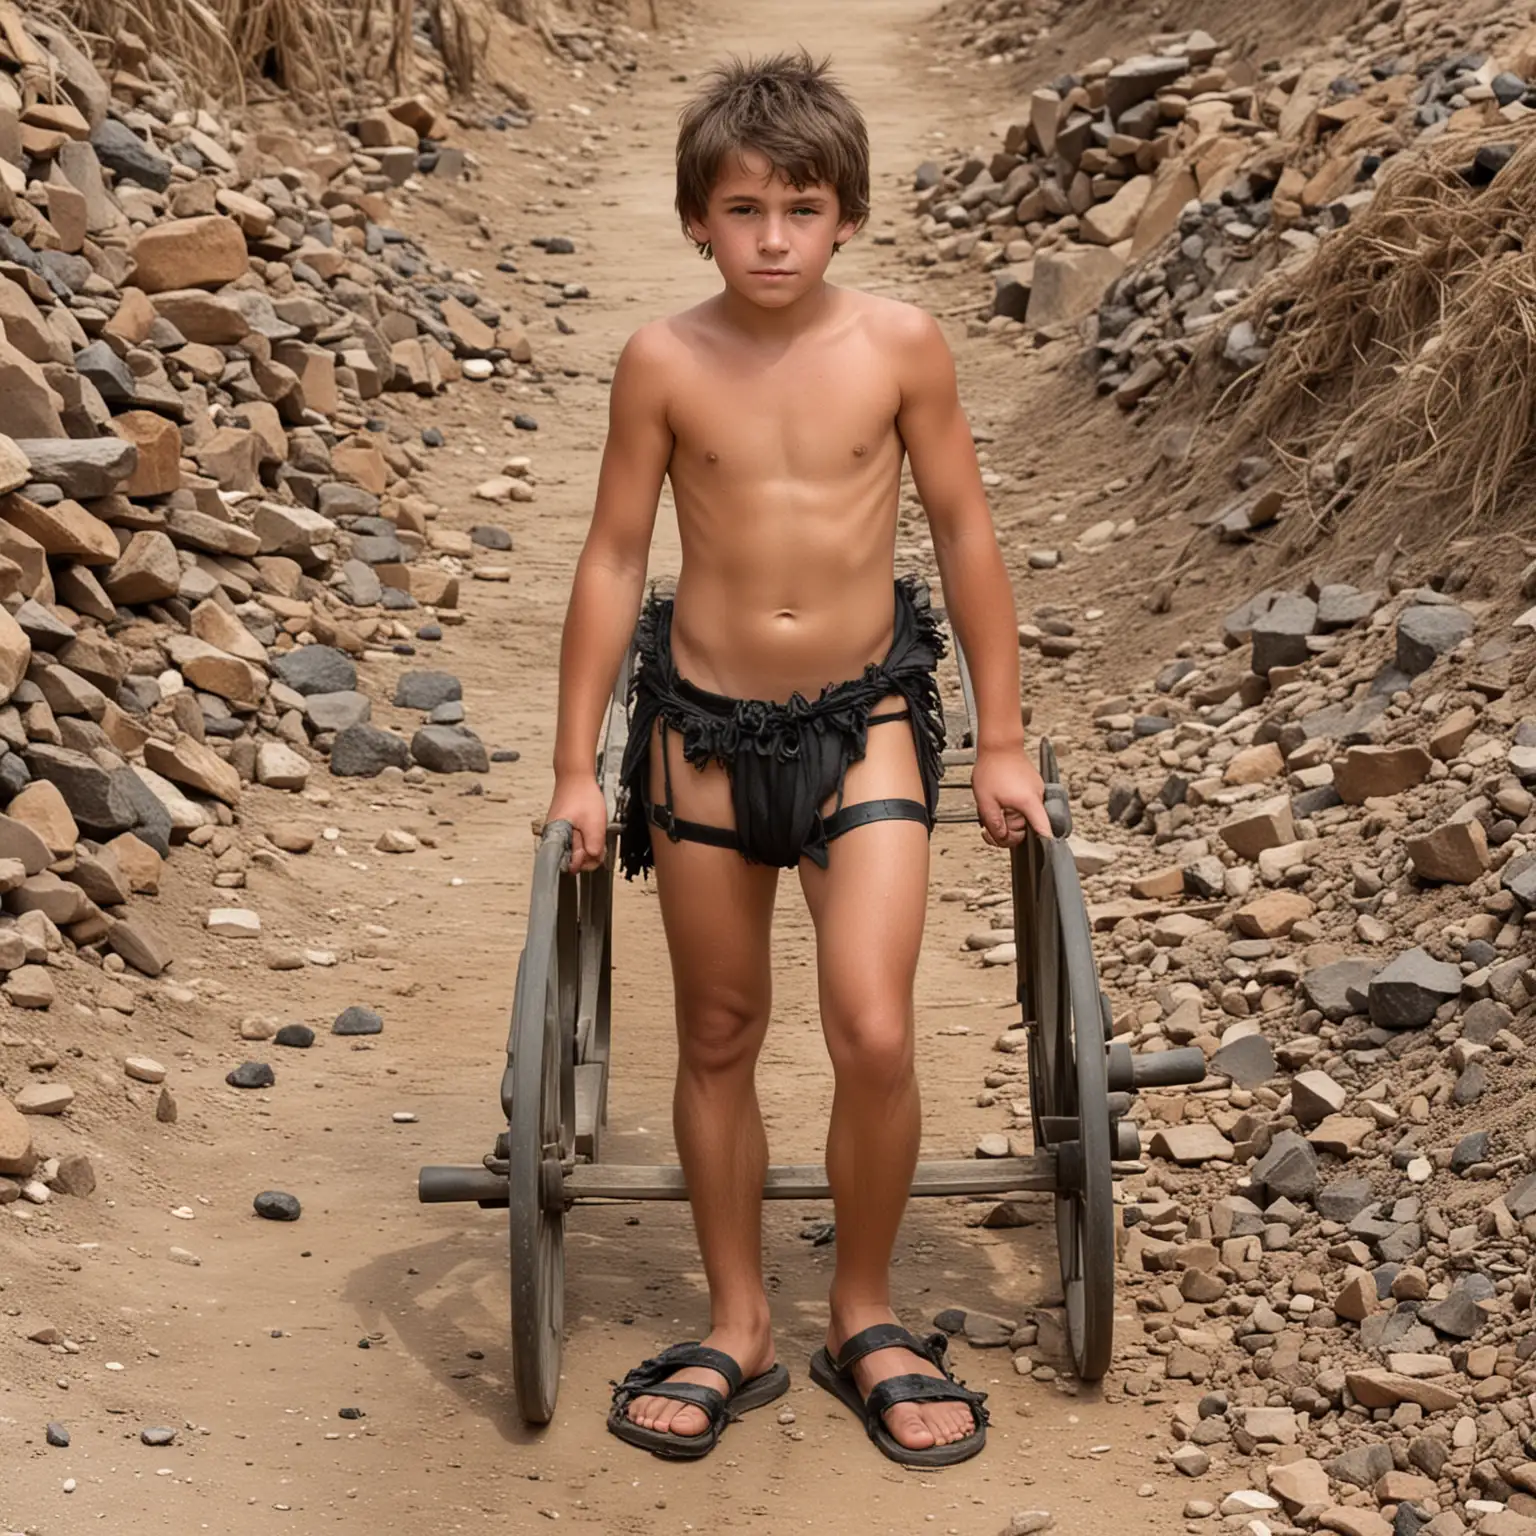 in the slave mines, very cute boy, 18 yrs old, bare tanned legs, very hairy legs, sexy slave costume, sandals, ankle bracelet, pulling a heavy cart , cart is full of coal, Victorian onlookers